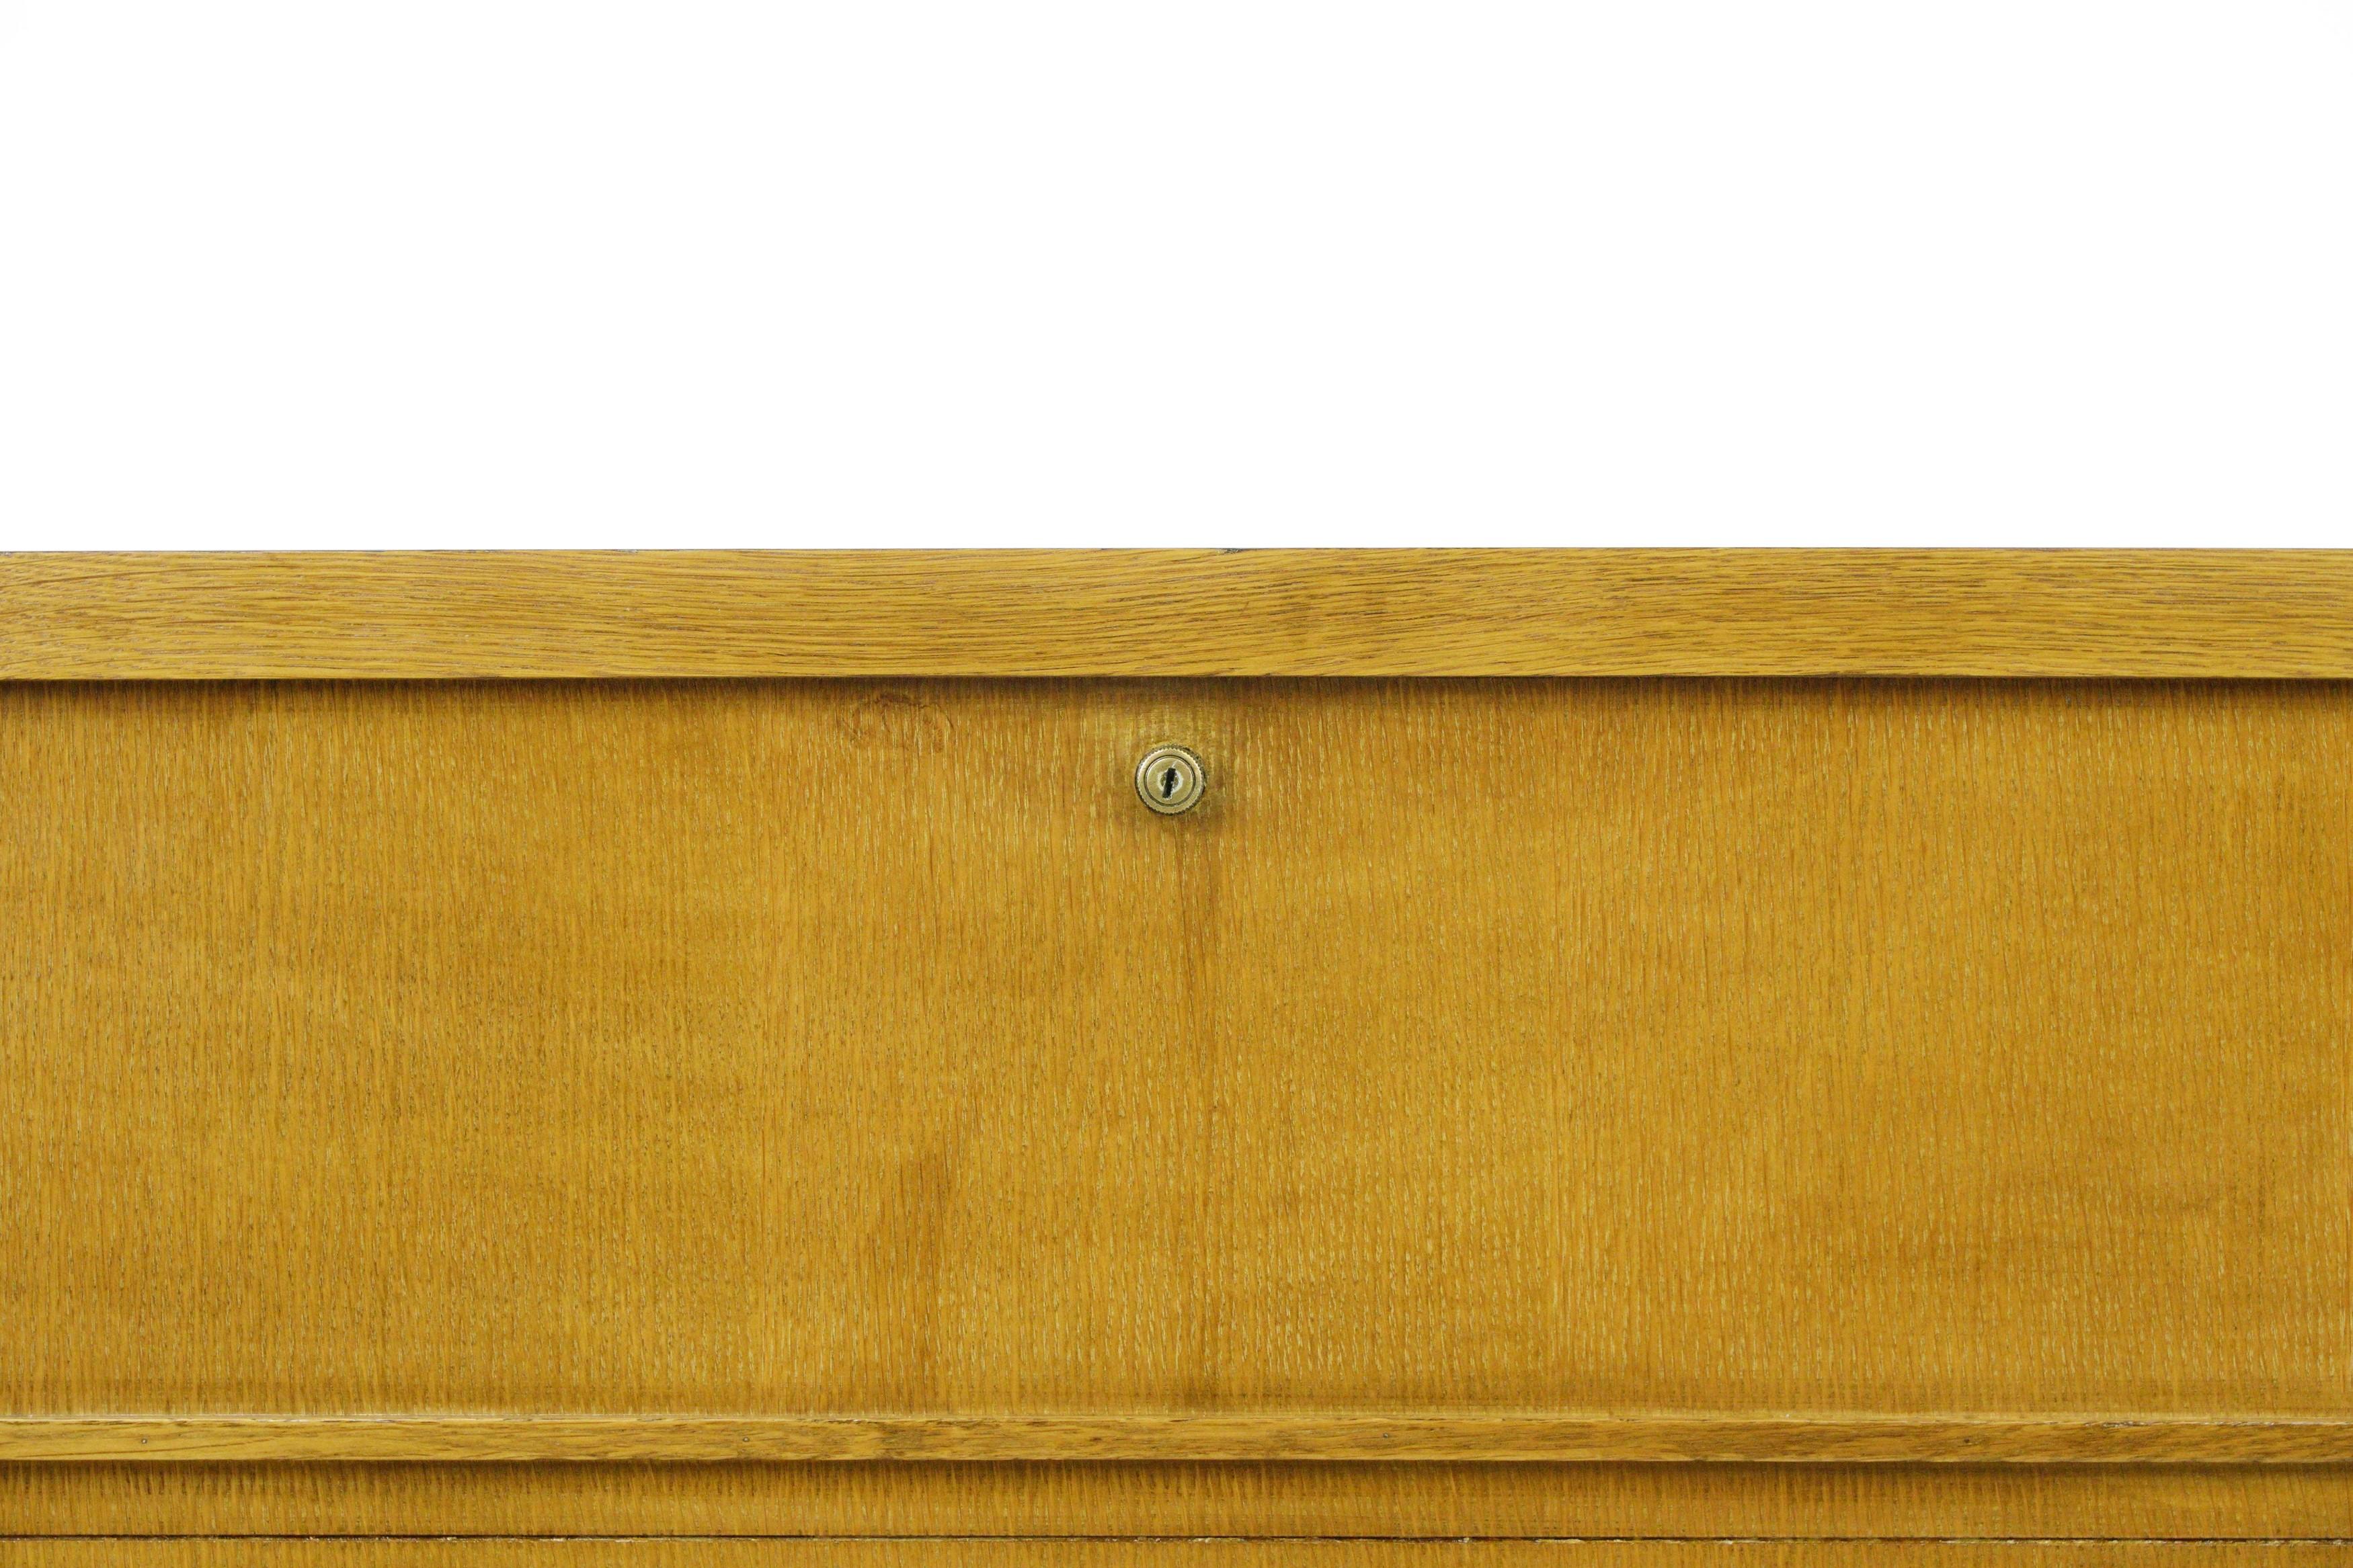 This piece features a beautiful blonde oak veneer, characteristic of mid-century design, and is crafted with precision by Cavalier. The spacious interior of the cedar chest provides ample storage space, and the oak veneer adds warmth and